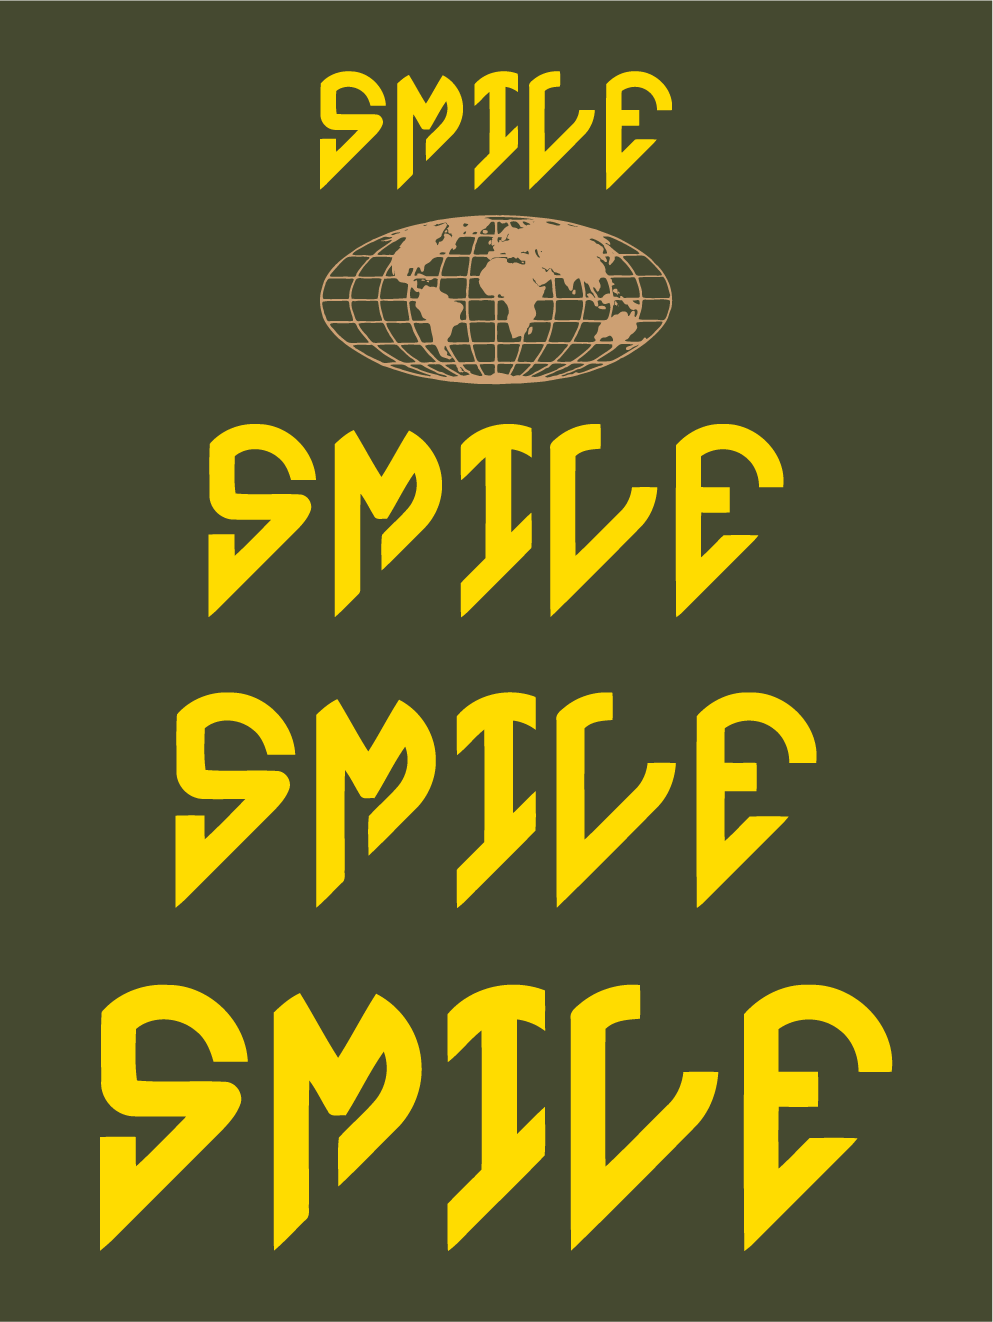 I want you to smile shirt design - zoomed